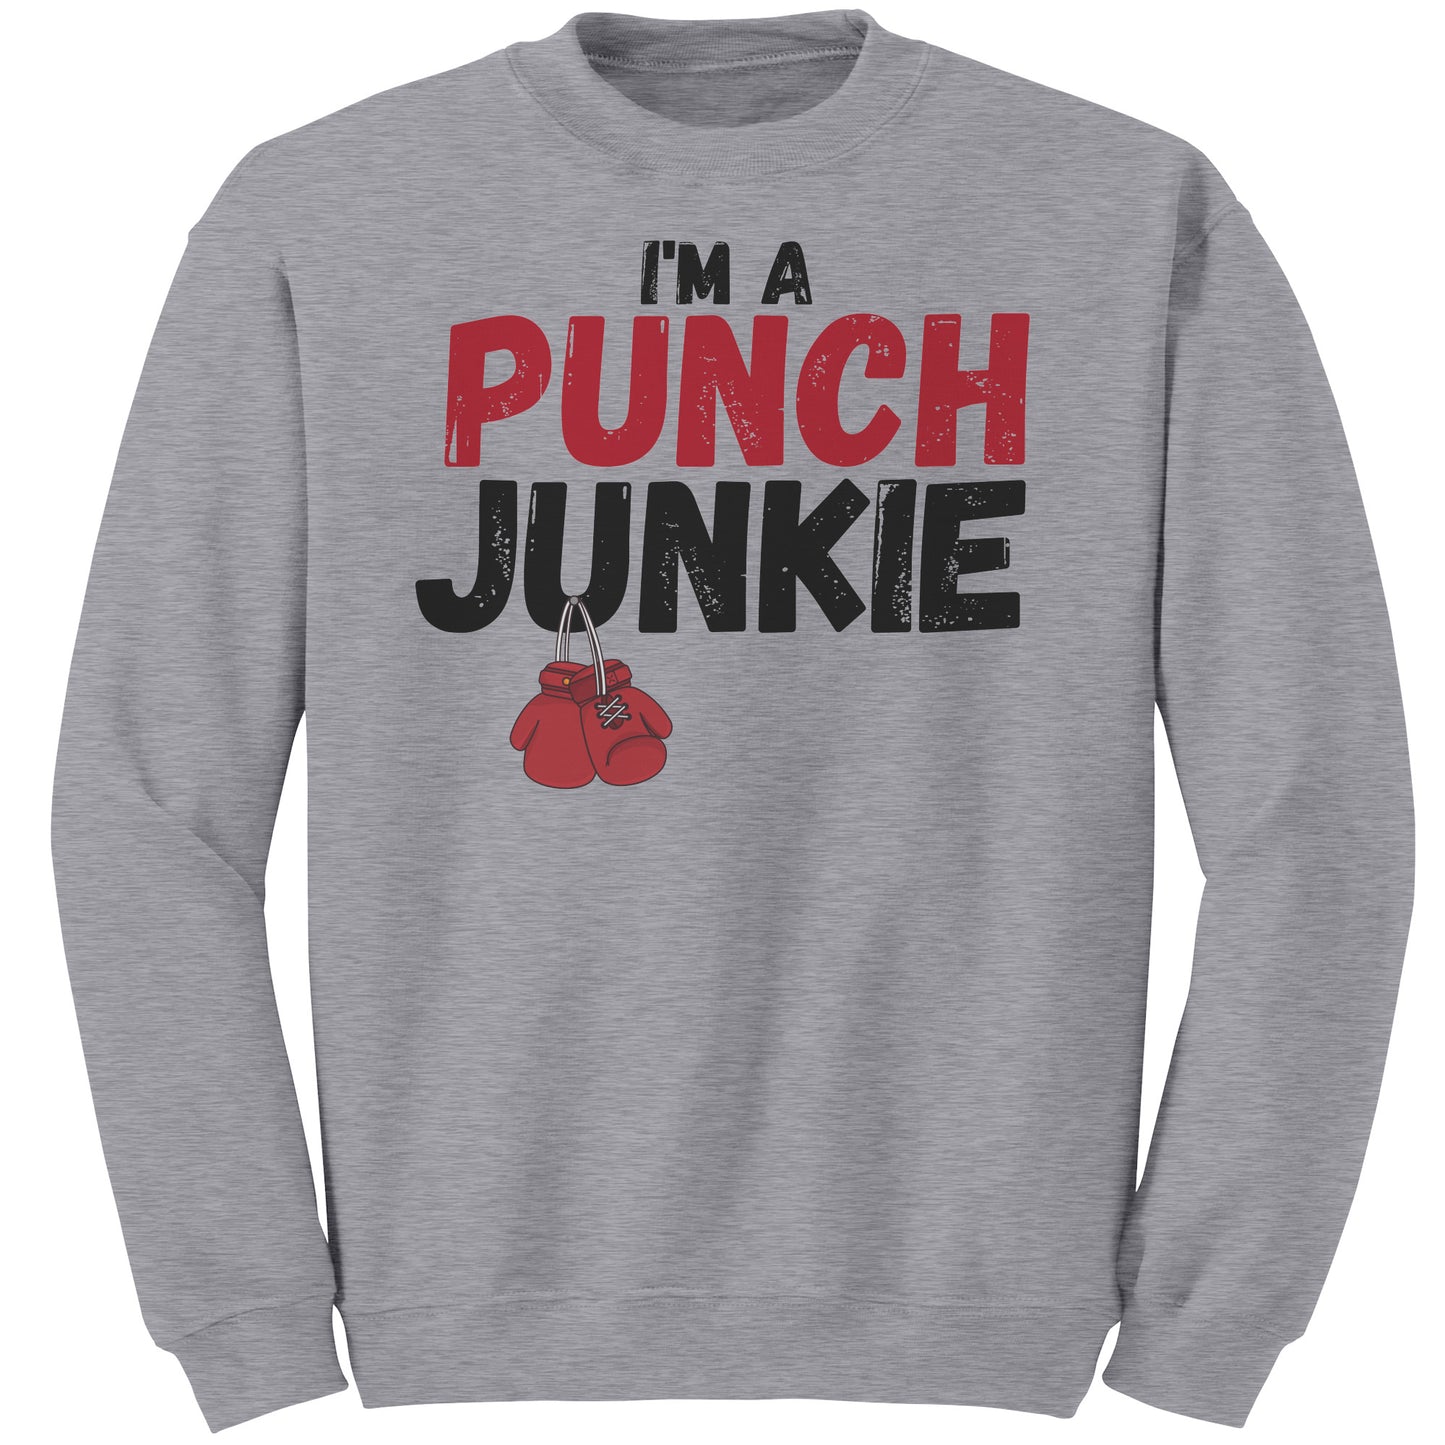 The "I'm a Punch Junkie" Sweat Shirt